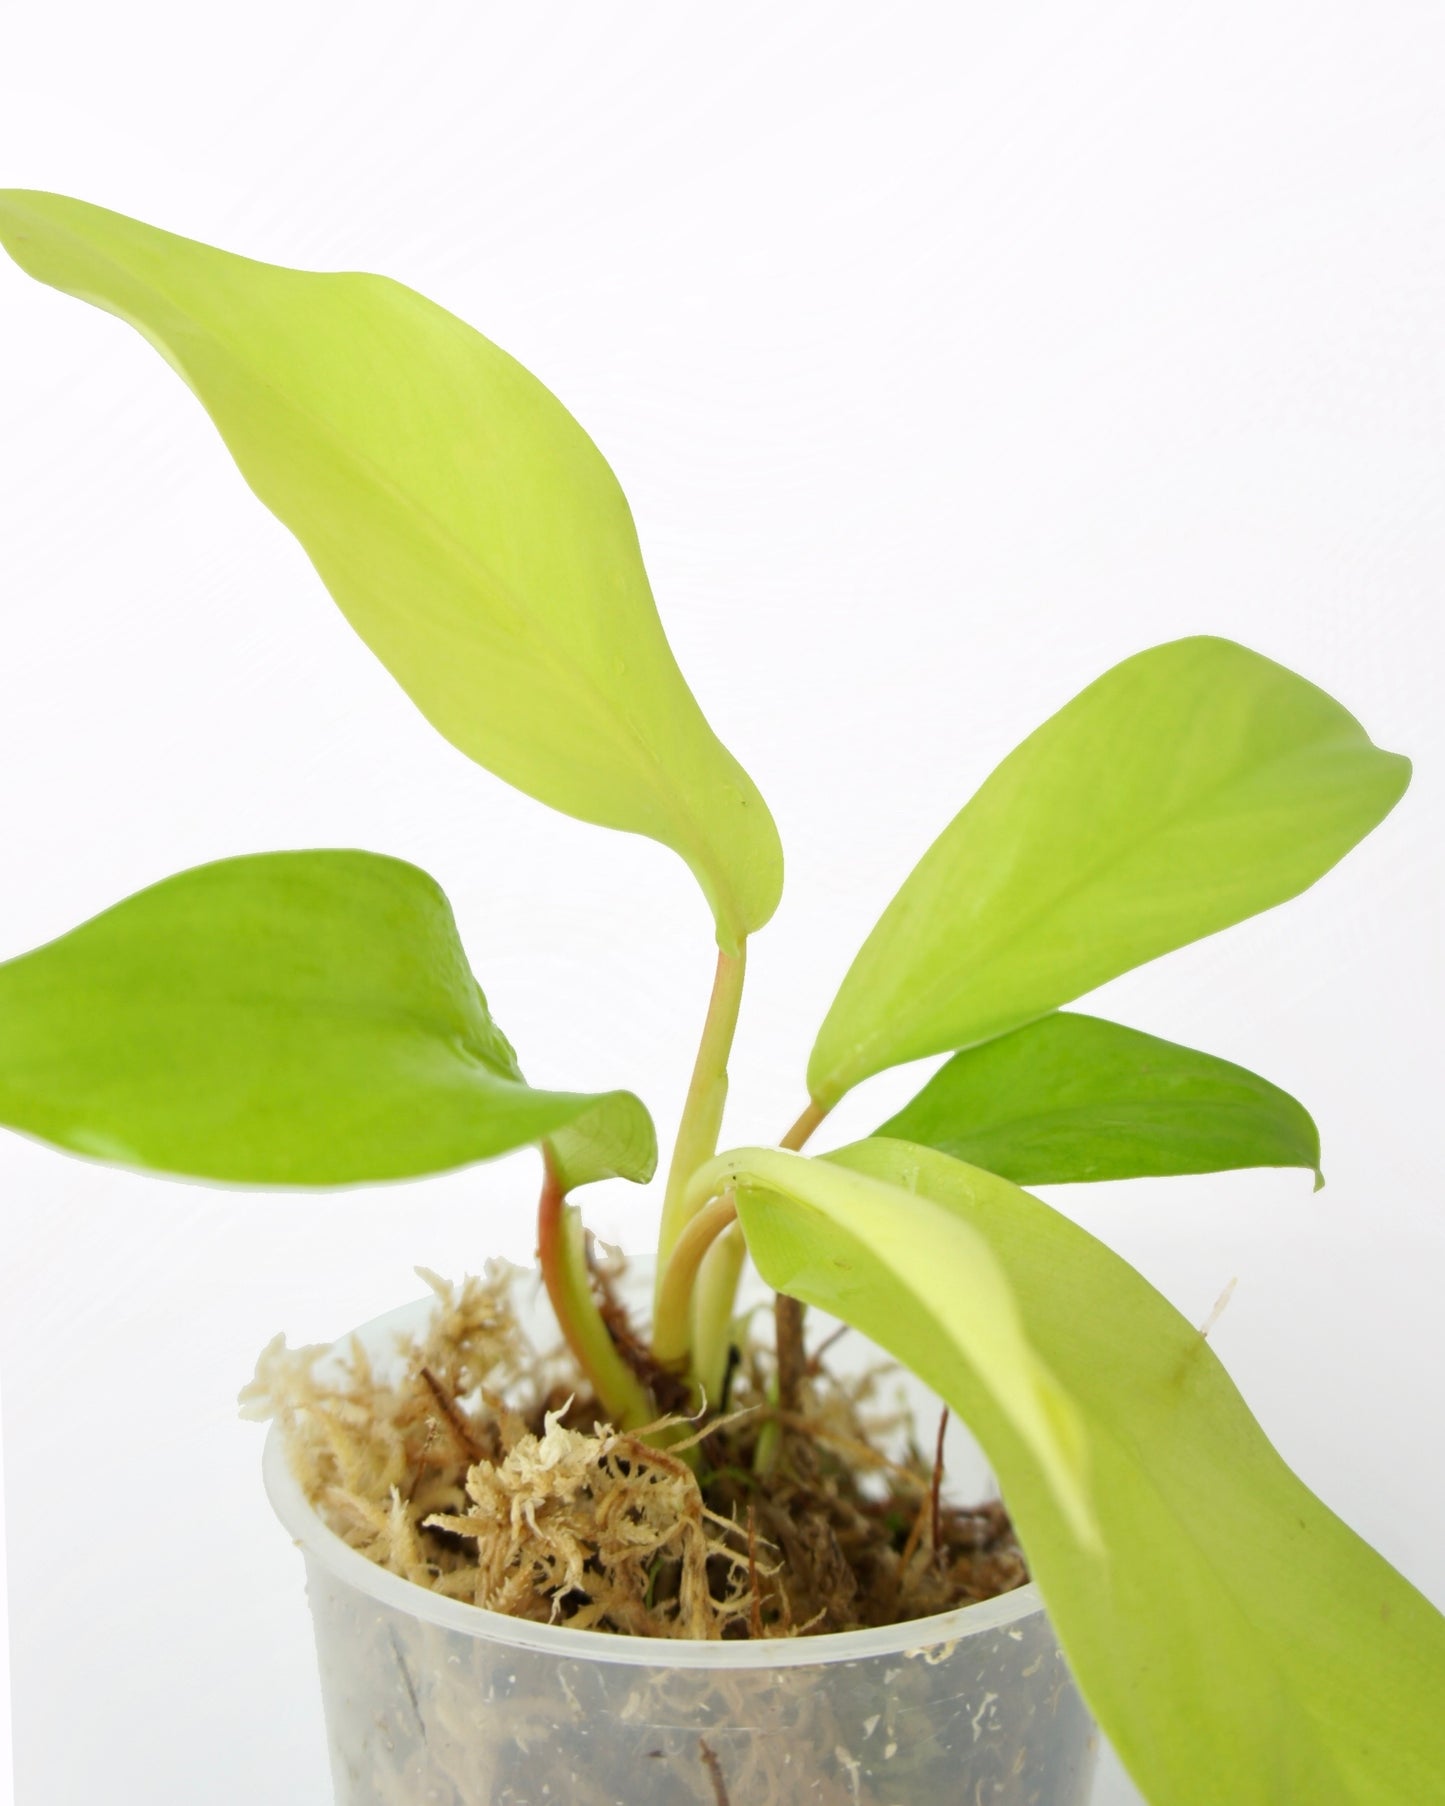 Philodendron Malay Gold